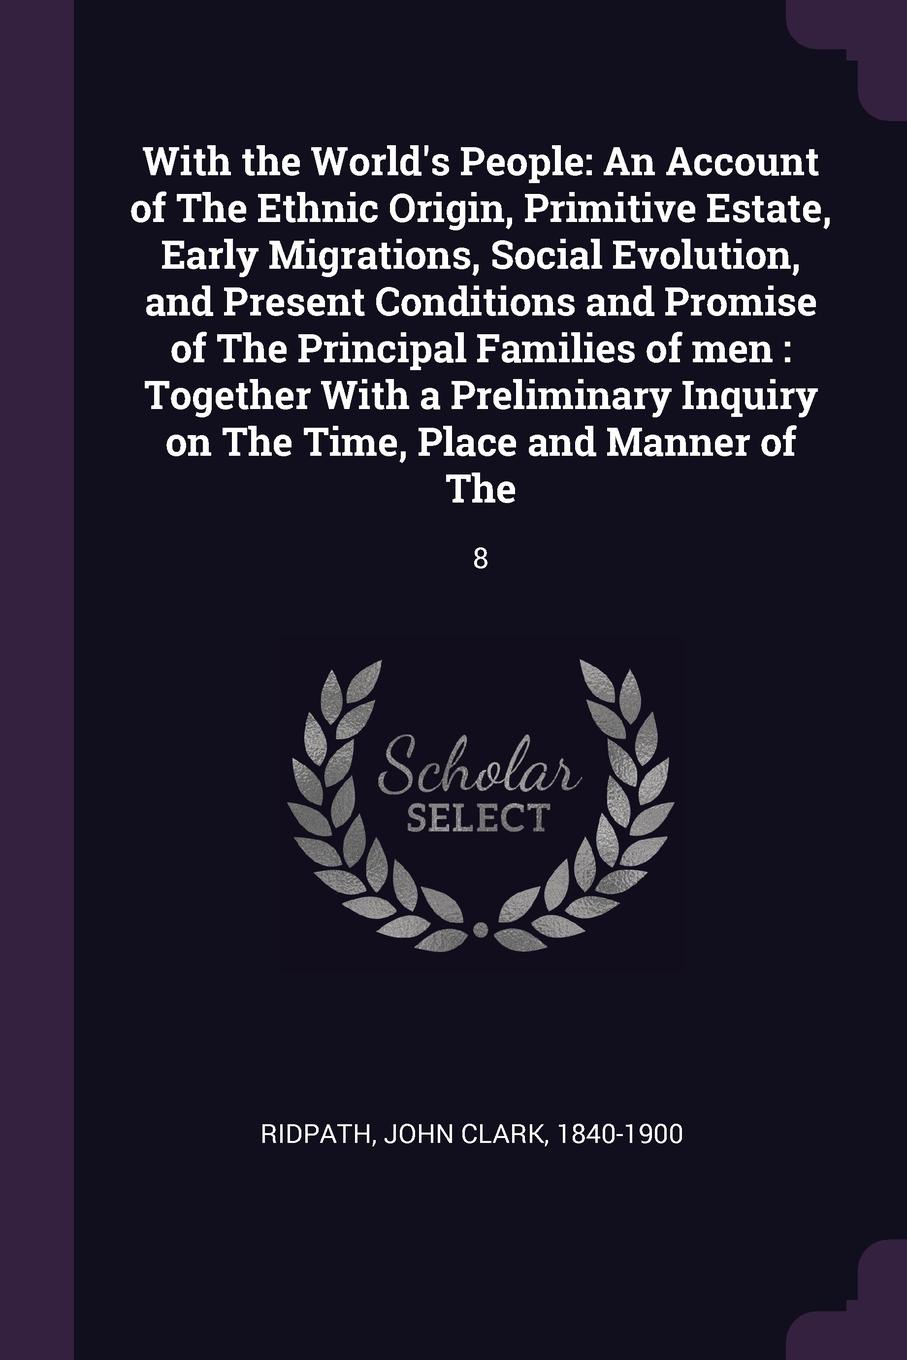 With the World`s People. An Account of The Ethnic Origin, Primitive Estate, Early Migrations, Social Evolution, and Present Conditions and Promise of The Principal Families of men : Together With a Preliminary Inquiry on The Time, Place and Manner...